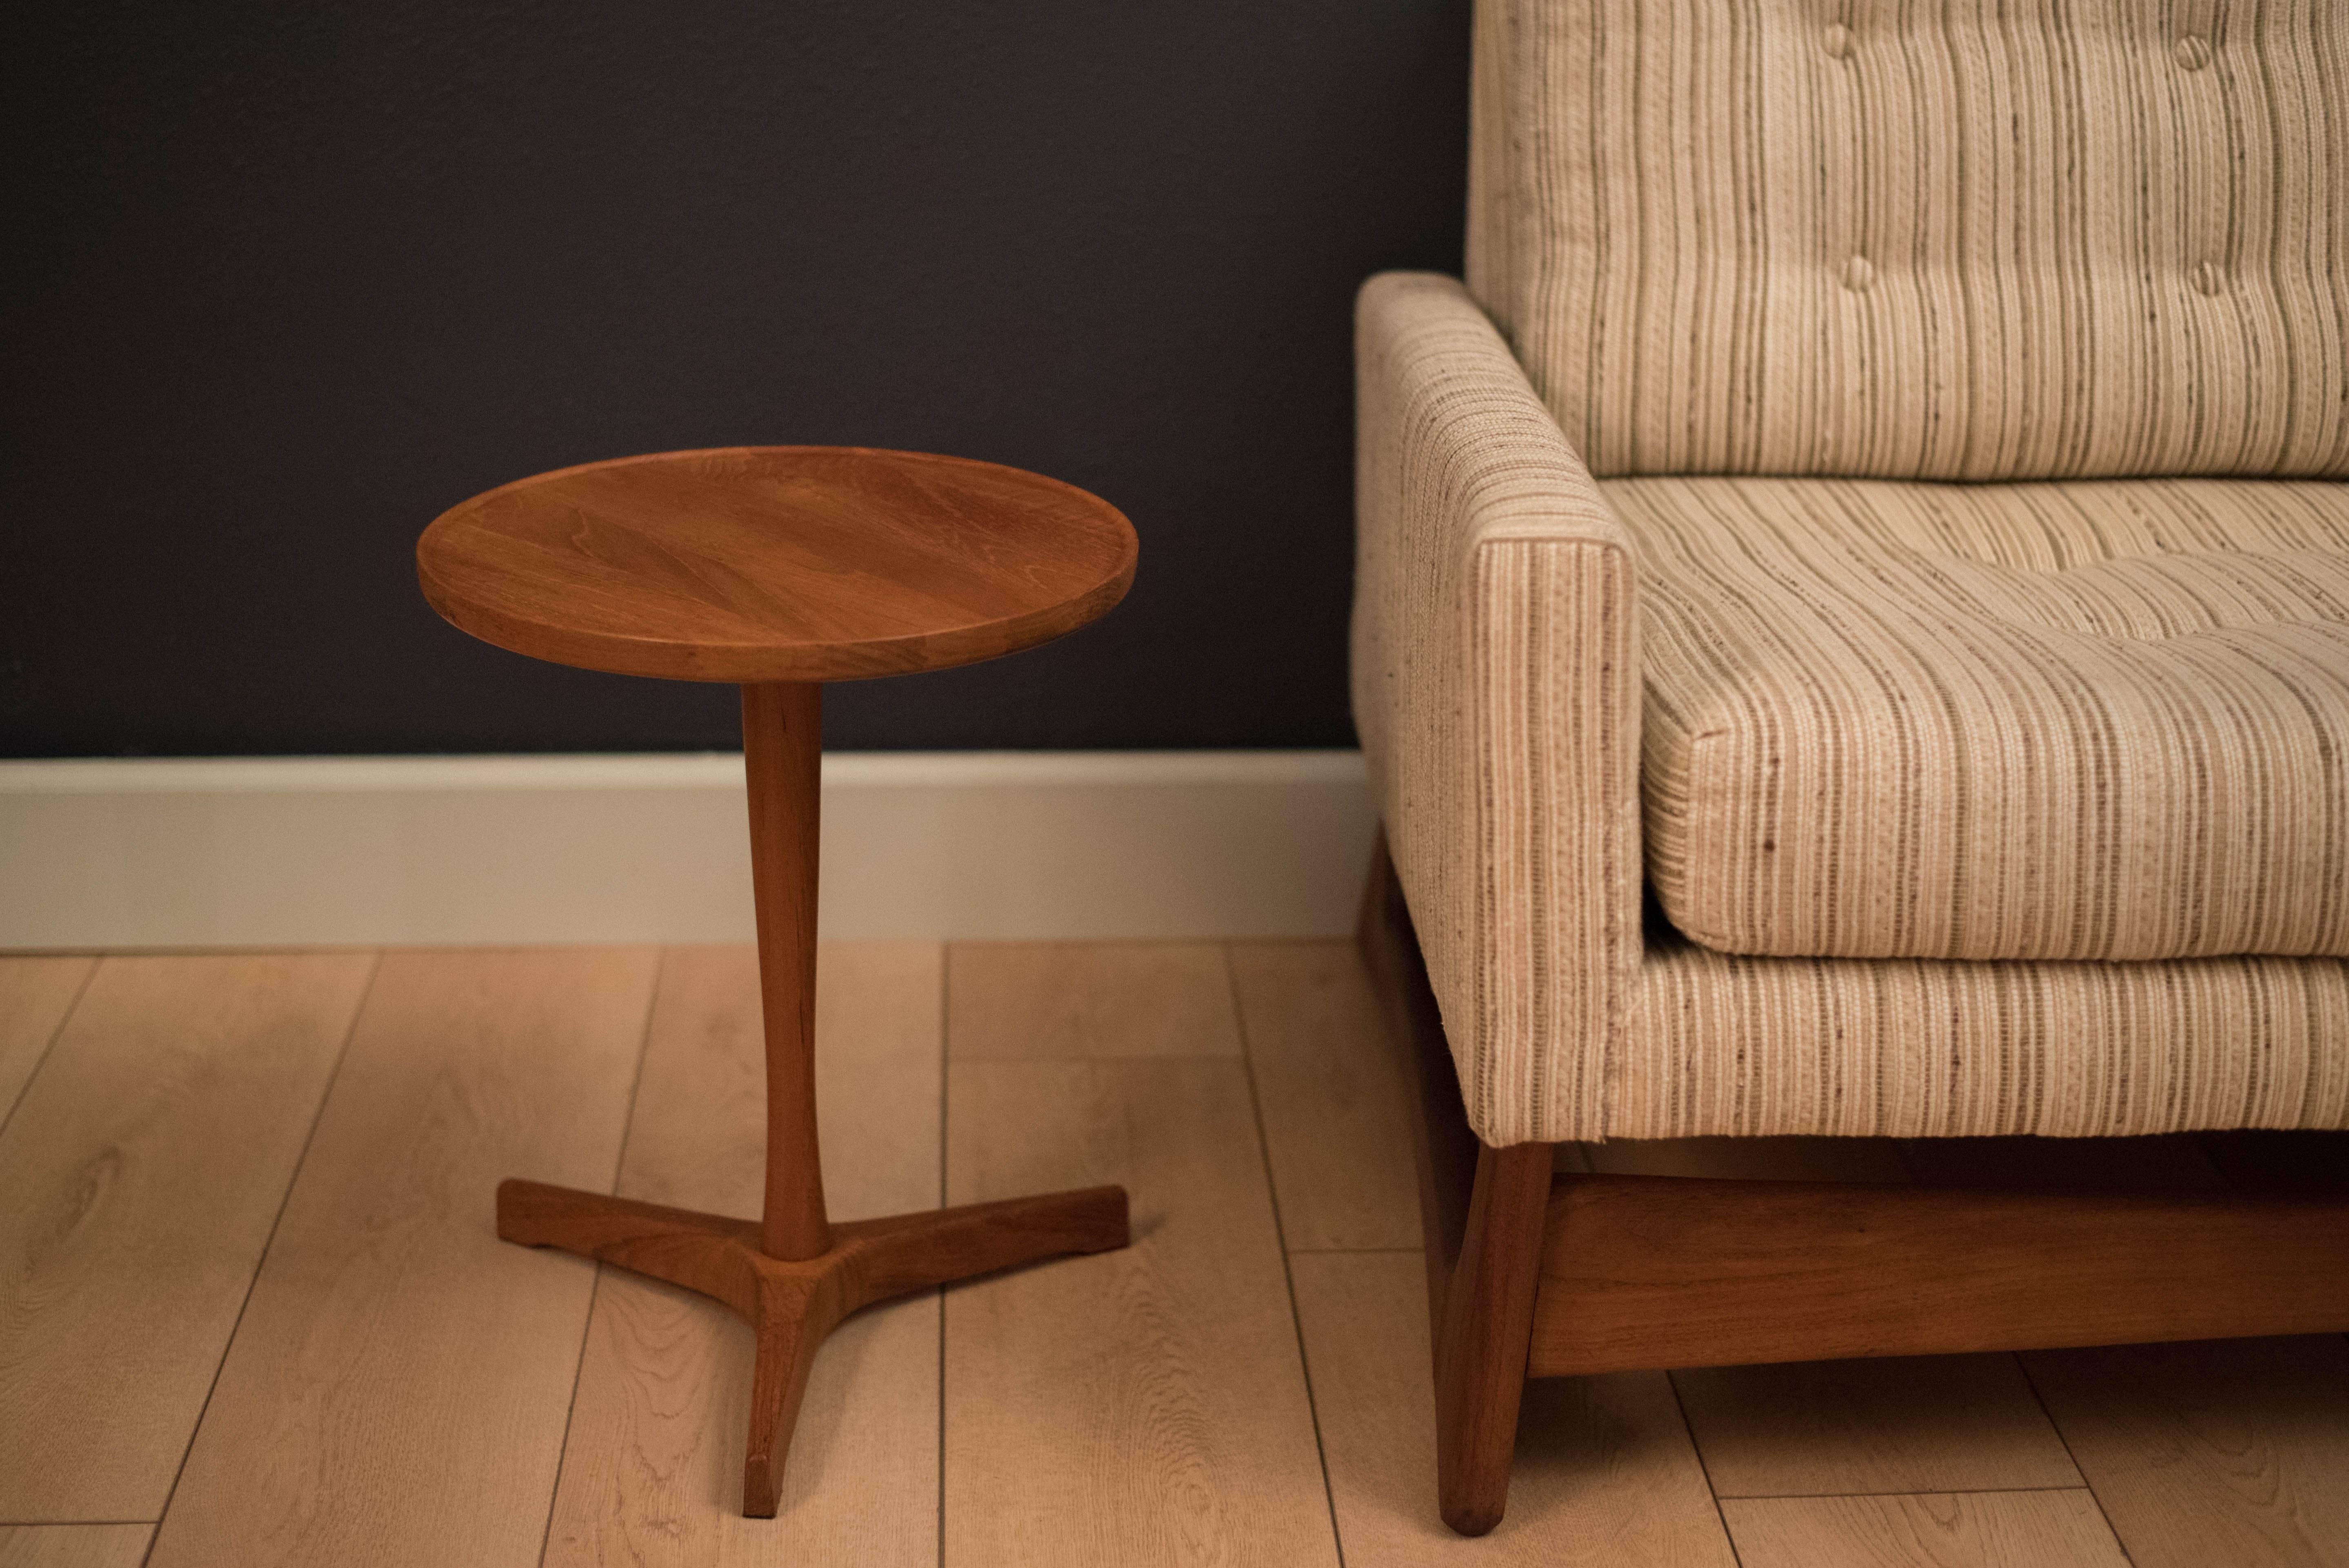 Mid-Century Modern teak side table designed by Hans C. Andersen for Artex. This piece has a round tabletop and a solid teak pedestal base.